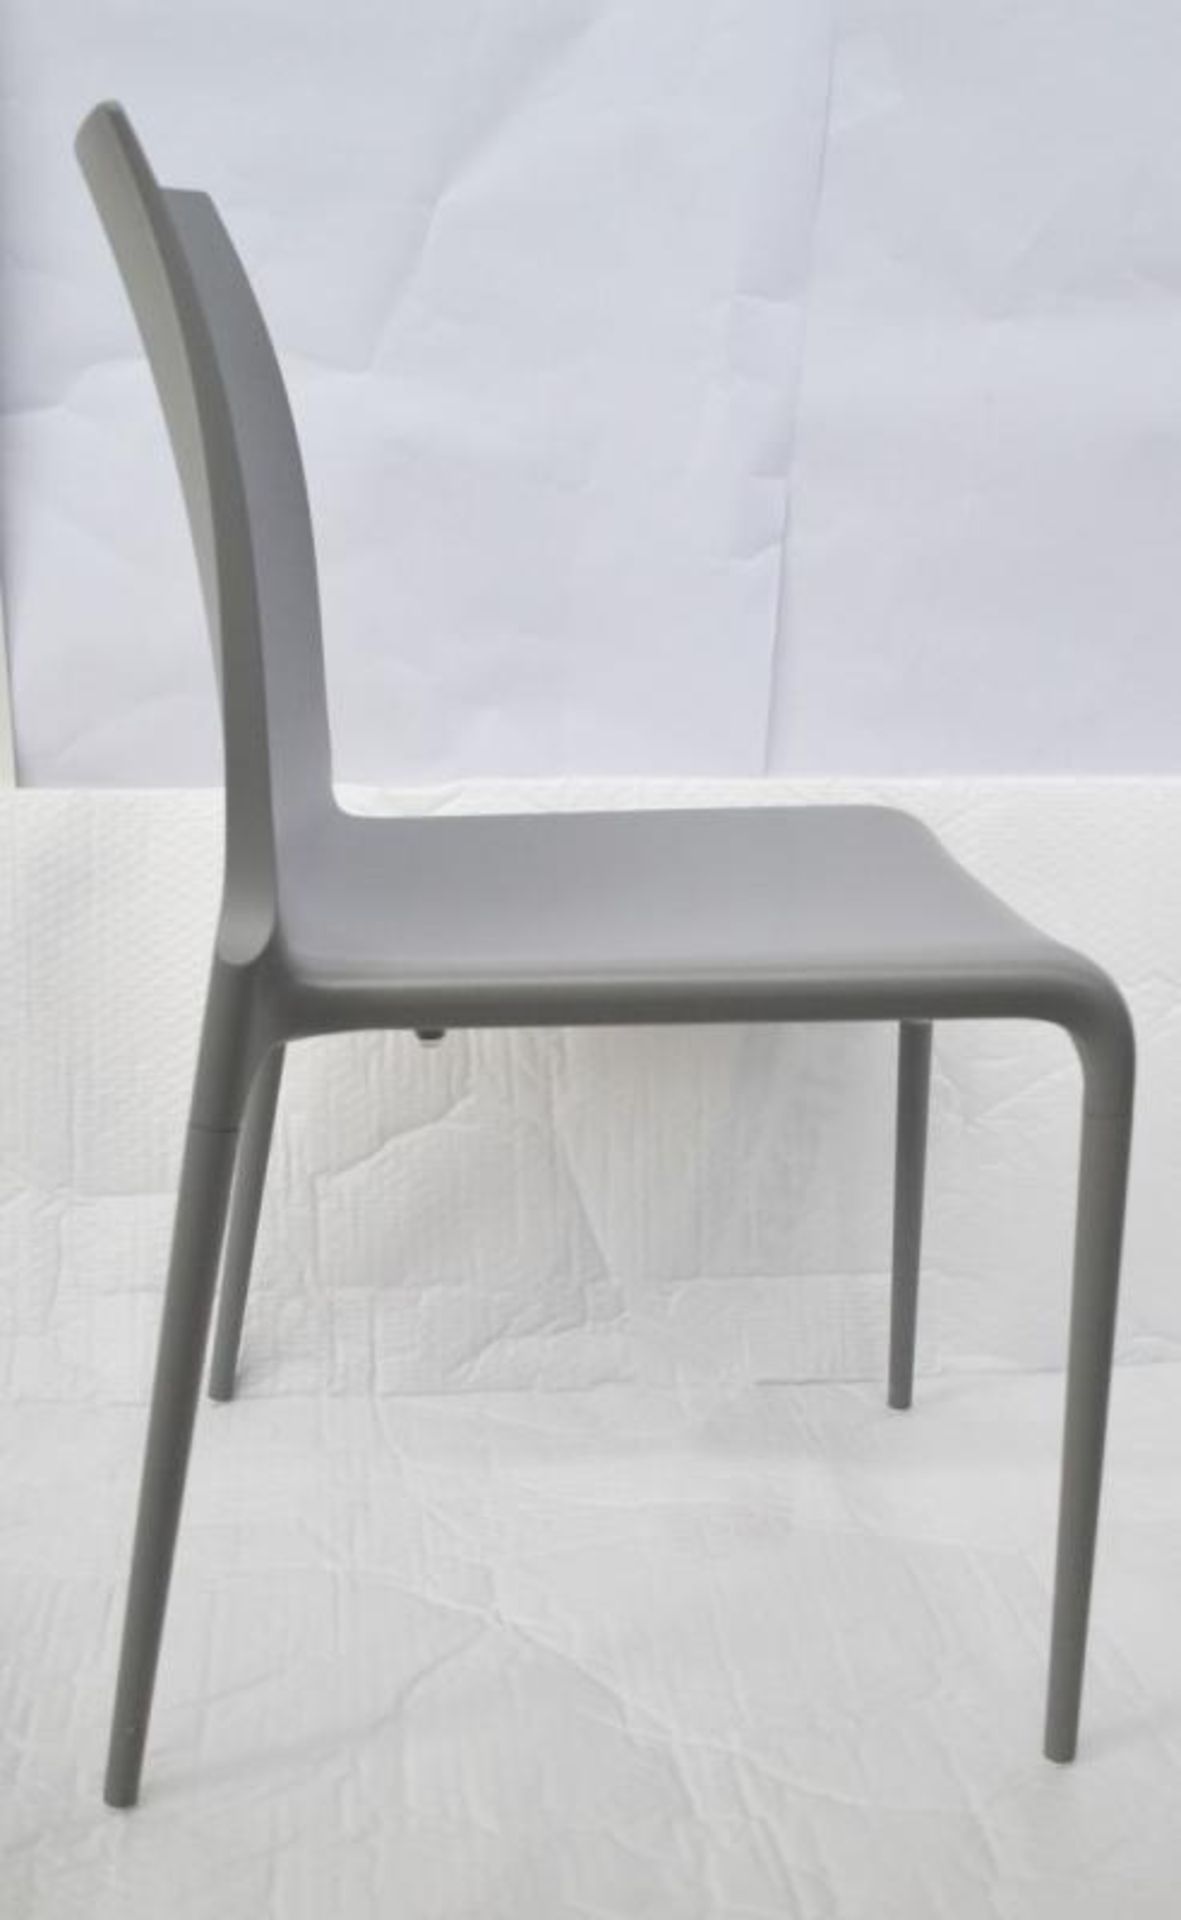 2 x LIGNE ROSET "Petra" Stackable Dining Chairs - Dimensions: W42 x D45 x H83, Seat Height: 46cm - R - Image 13 of 16